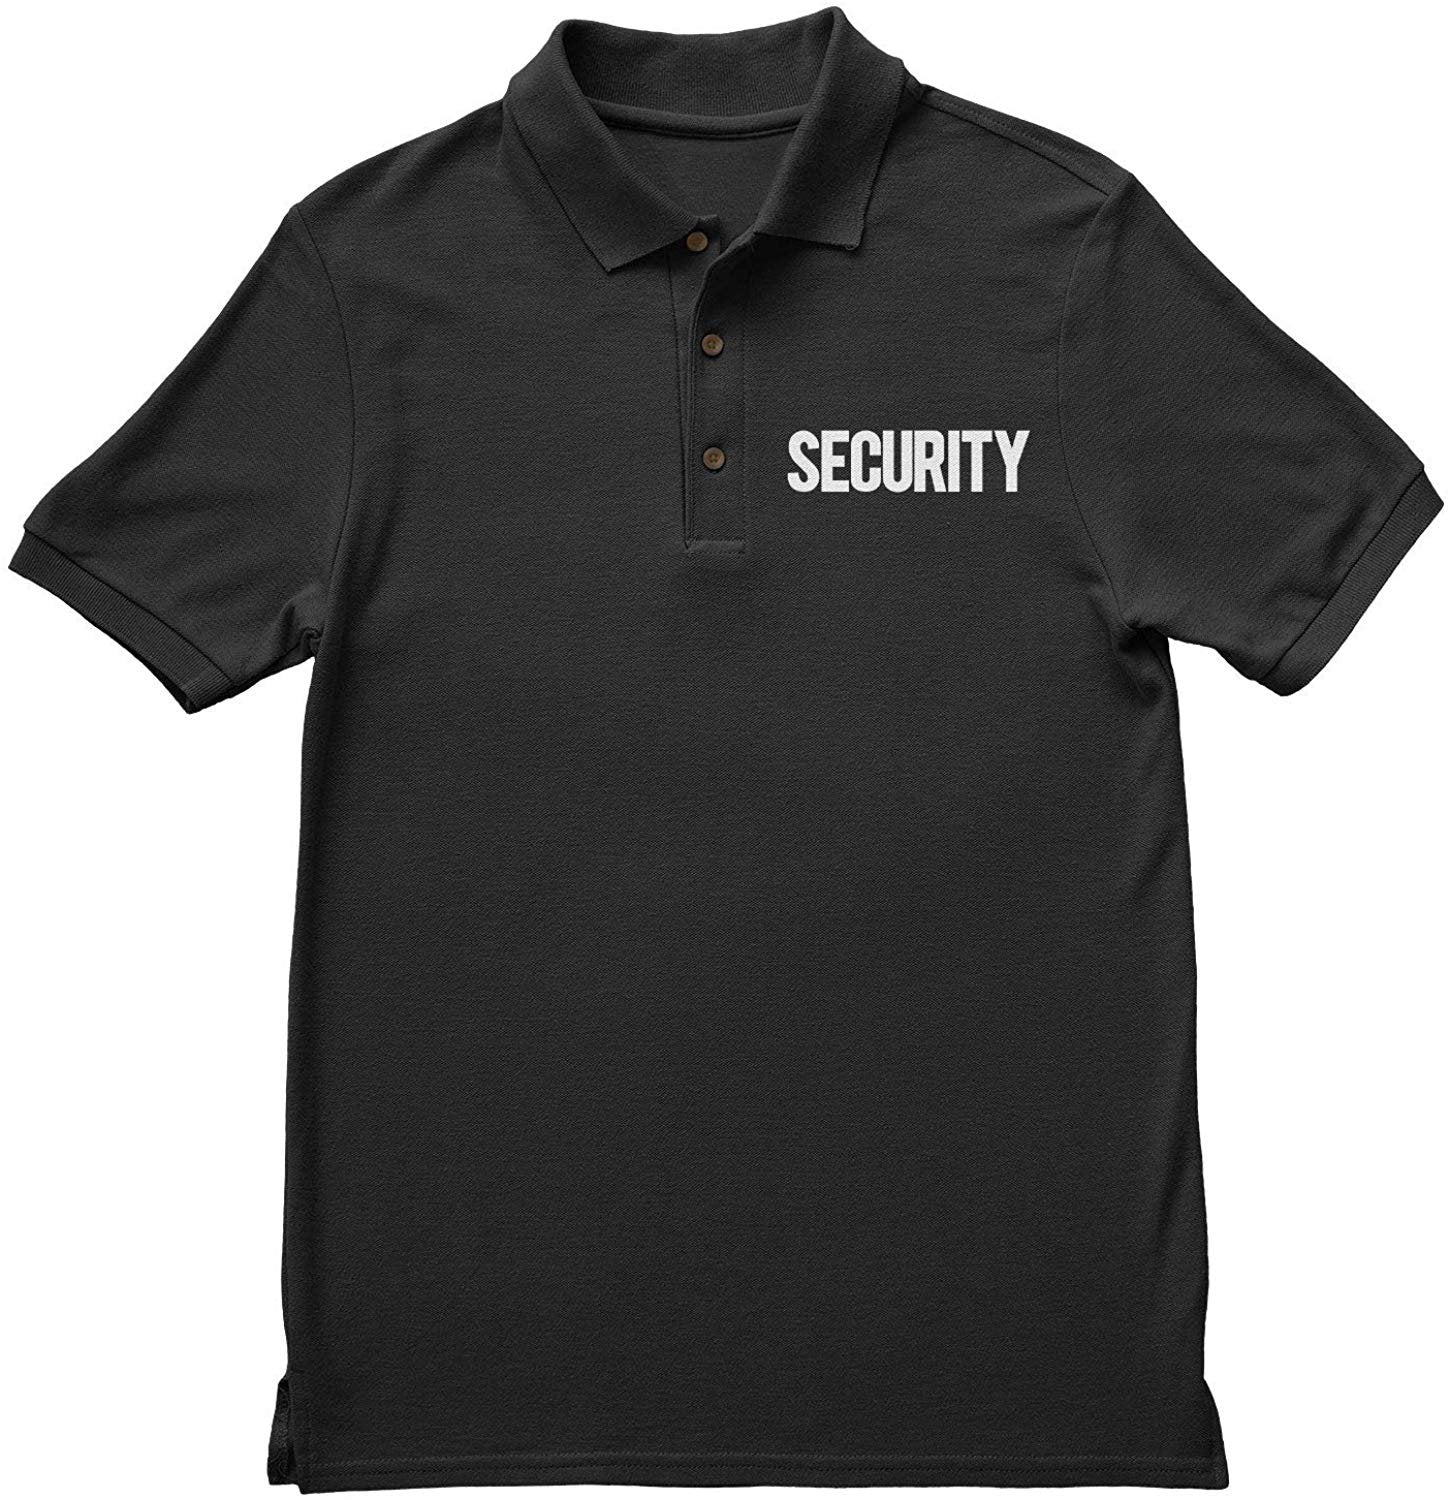 Mens Security Polo Shirt Front Back Print (Solid, Black / White)